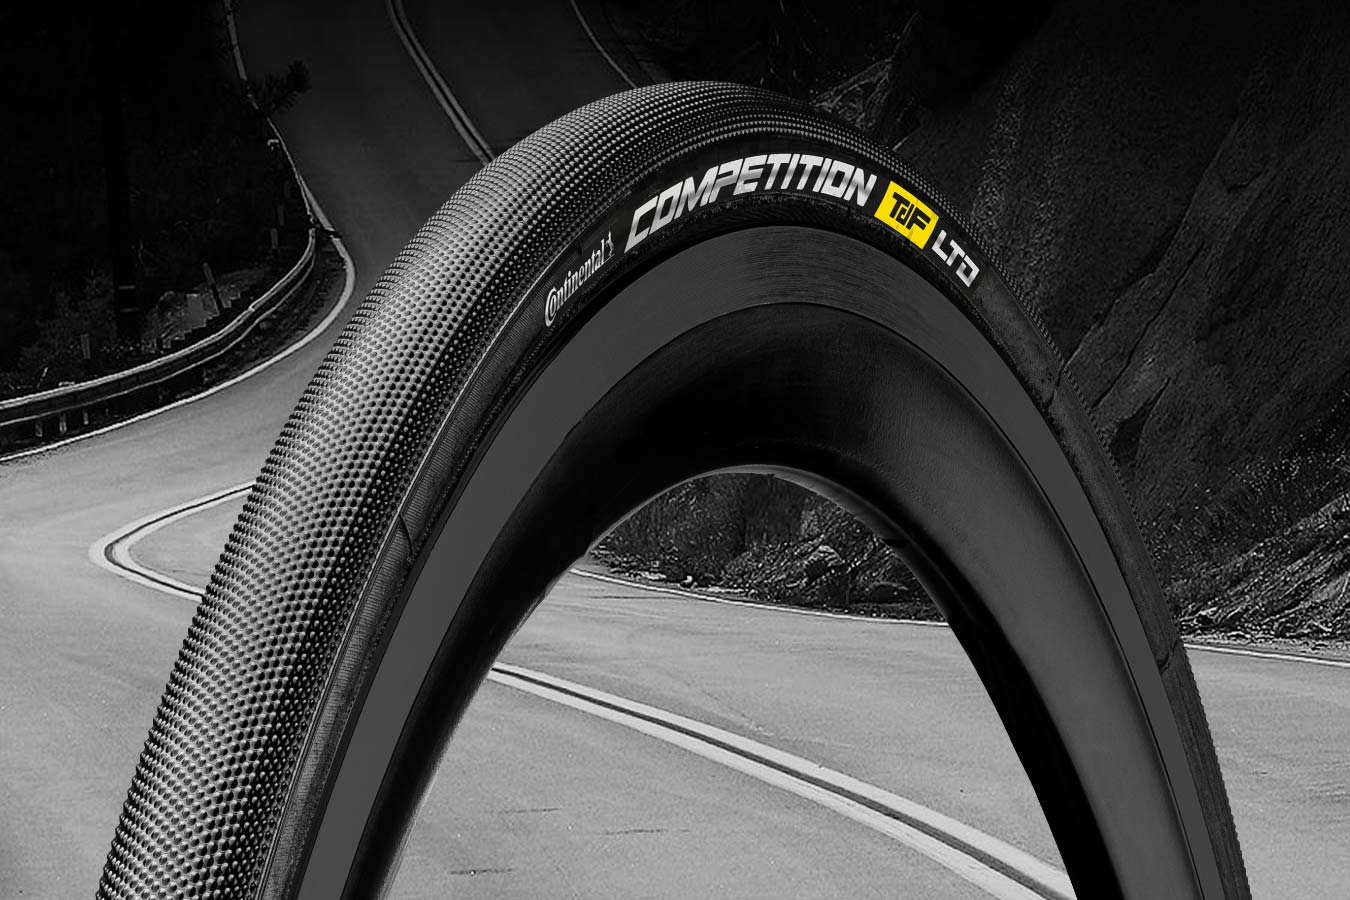 continental competition tubular 25